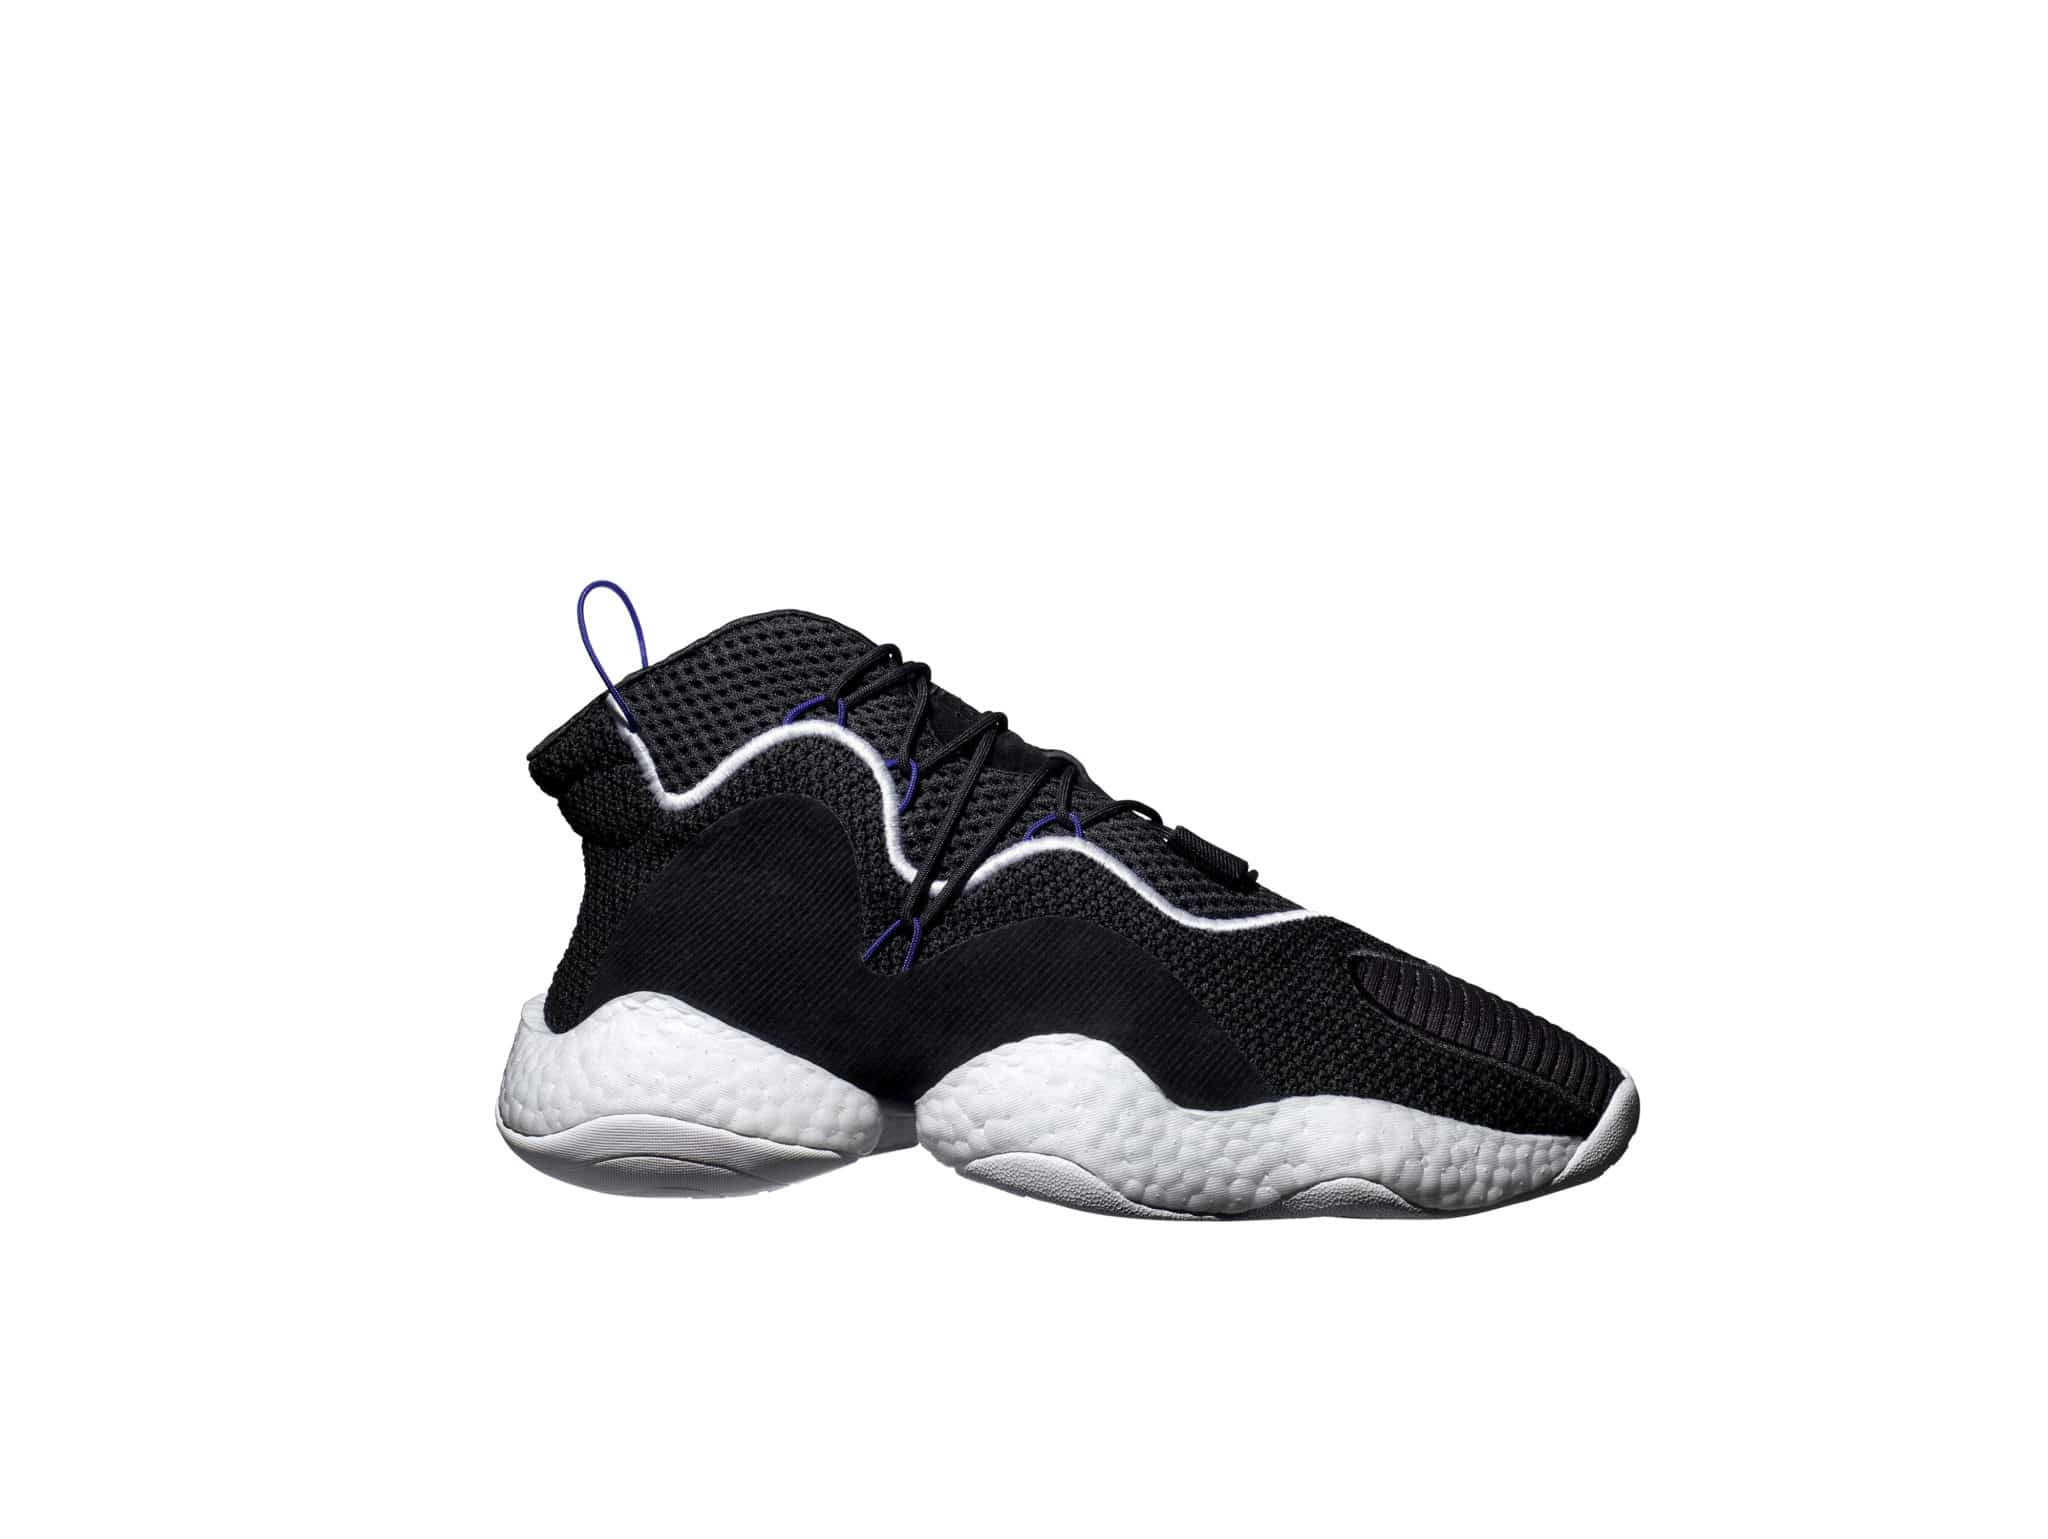 adidas crazy BYW official 7